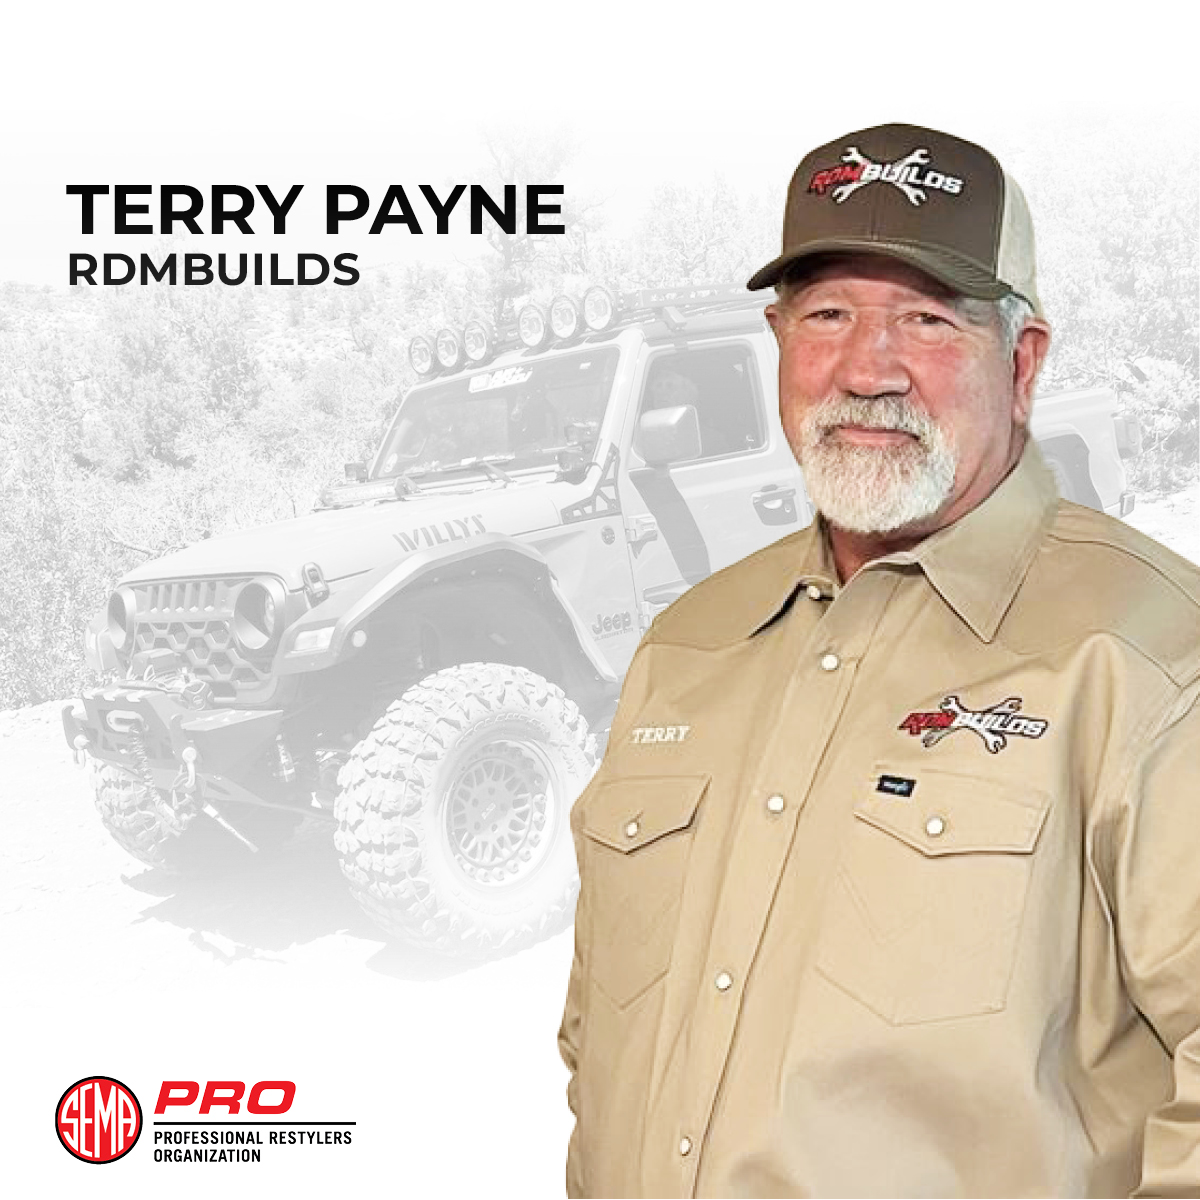 PRO Volunteer Spotlight: Terry Payne of RDMBUILDS Shares His Passion for Restyling